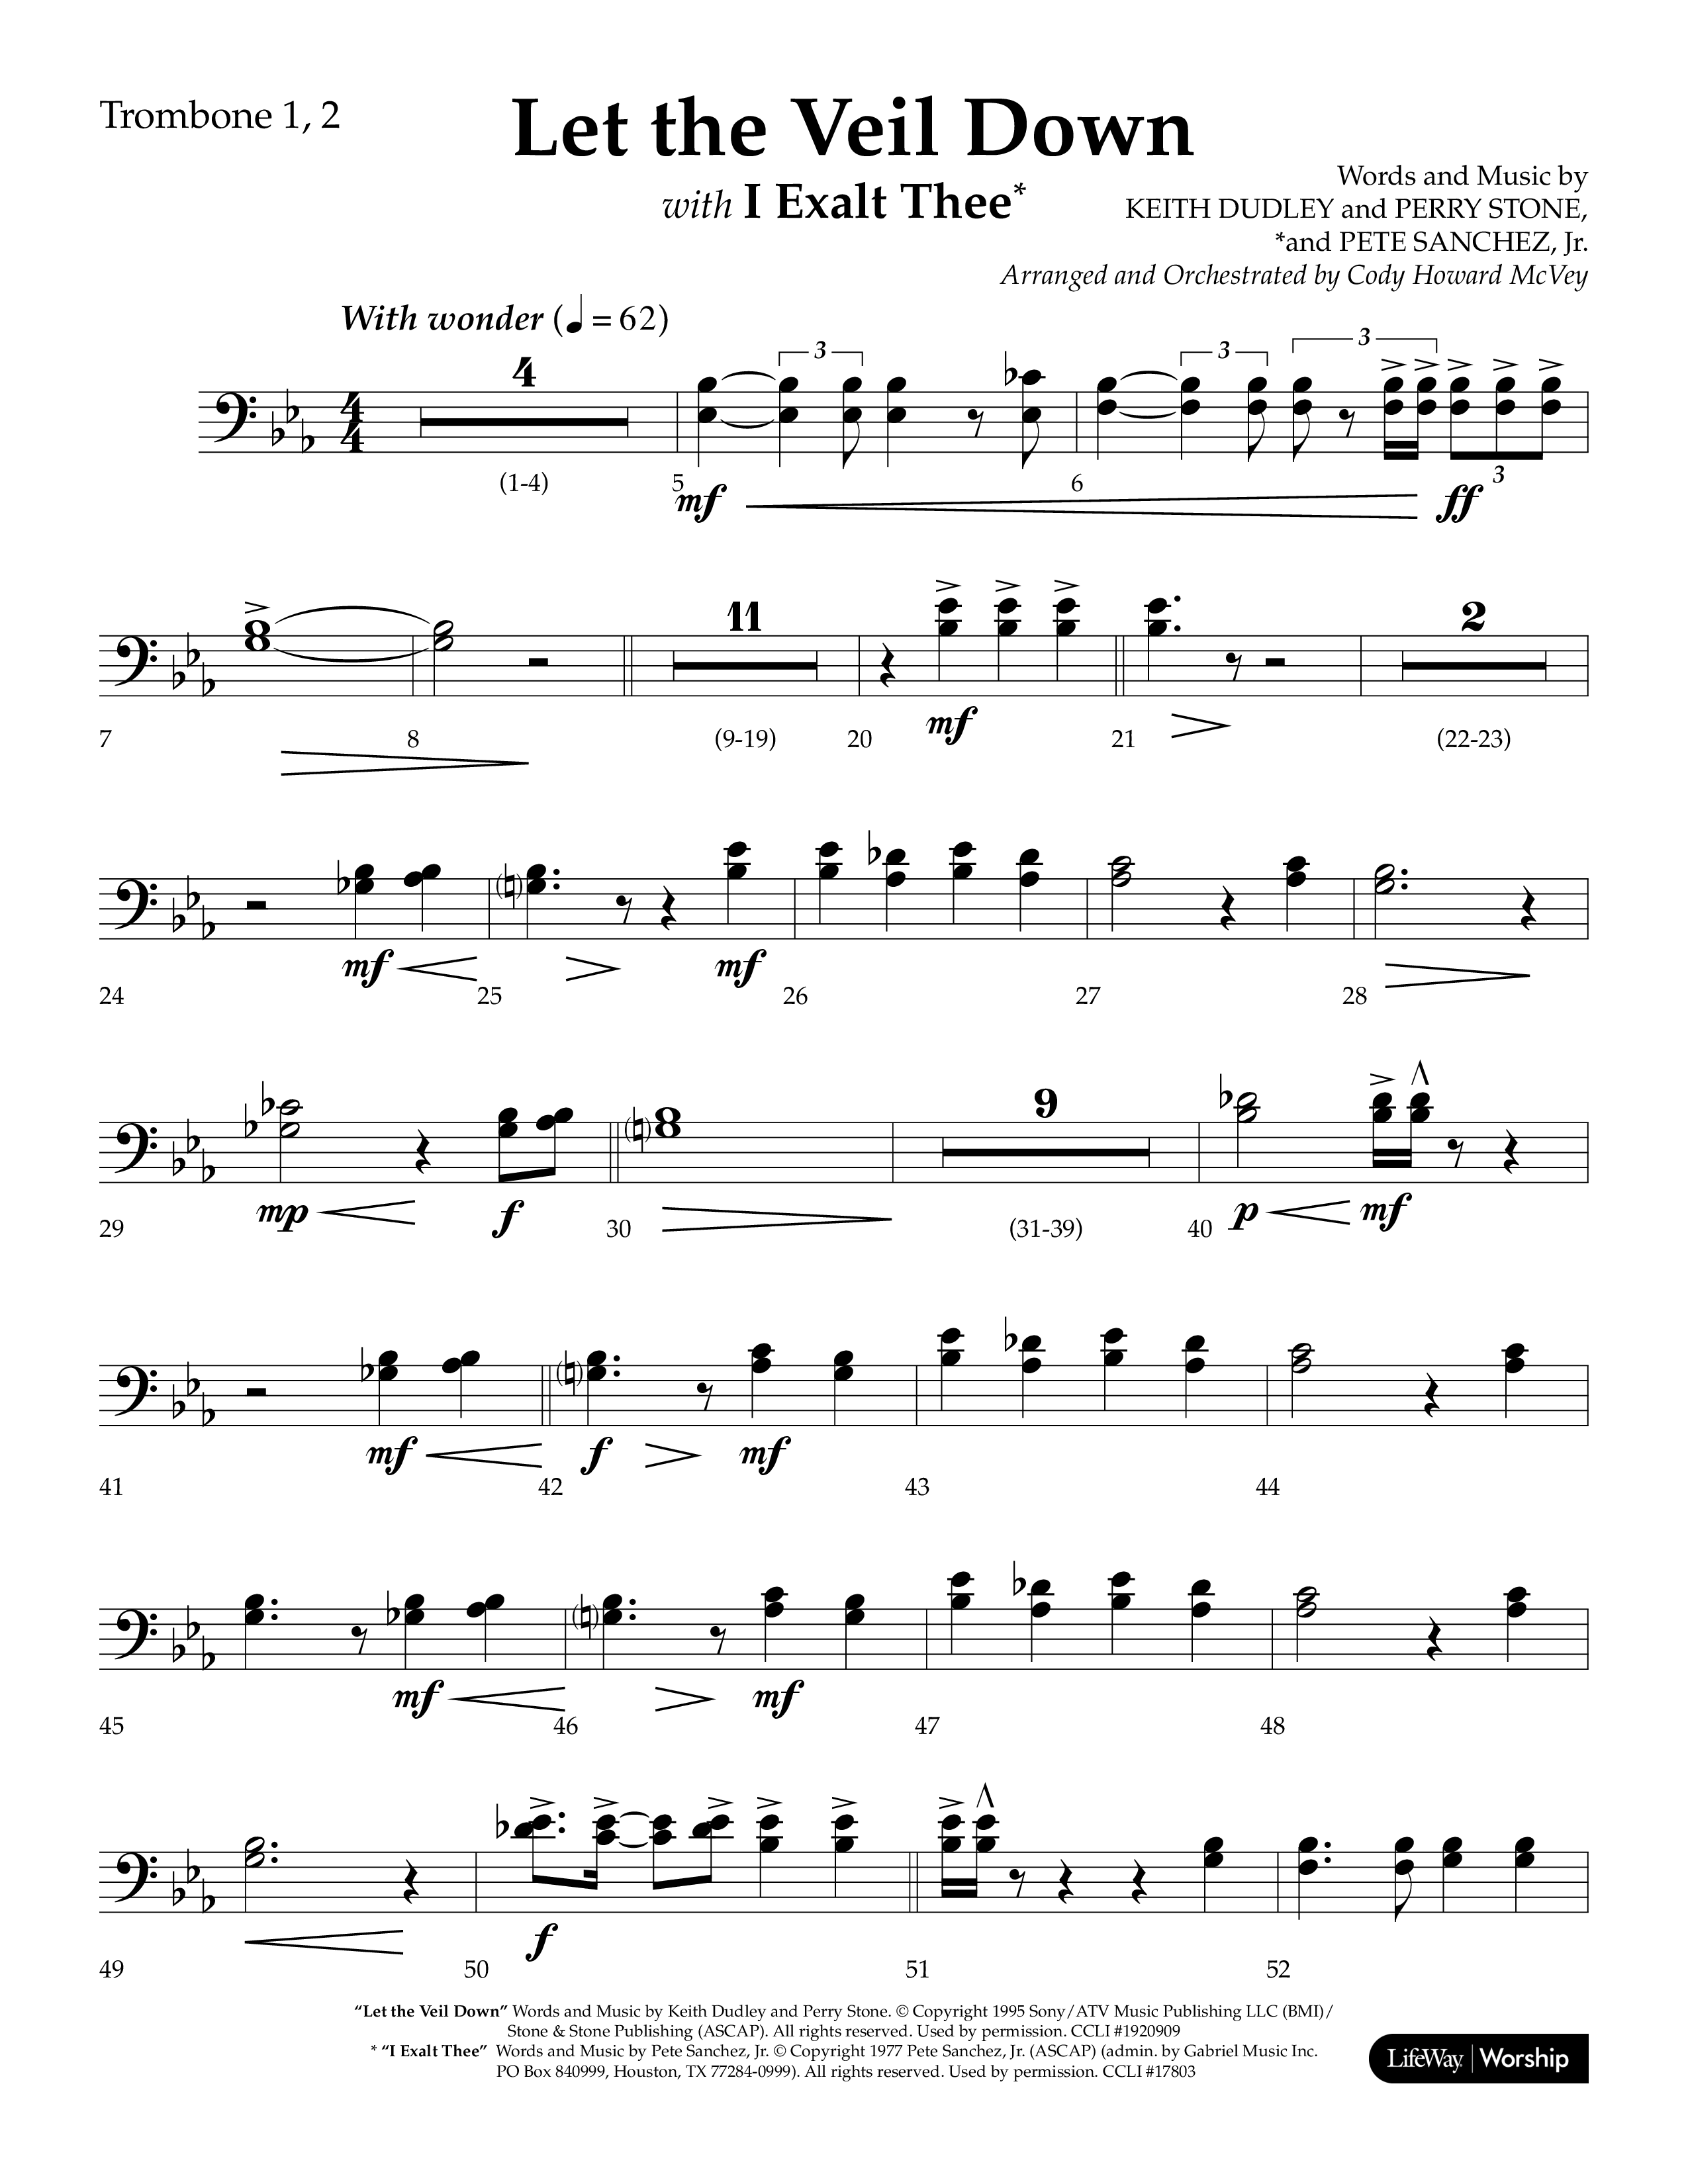 Let The Veil Down with I Exalt Thee (Choral Anthem SATB) Trombone 1/2 (Lifeway Choral / Arr. Cody McVey)